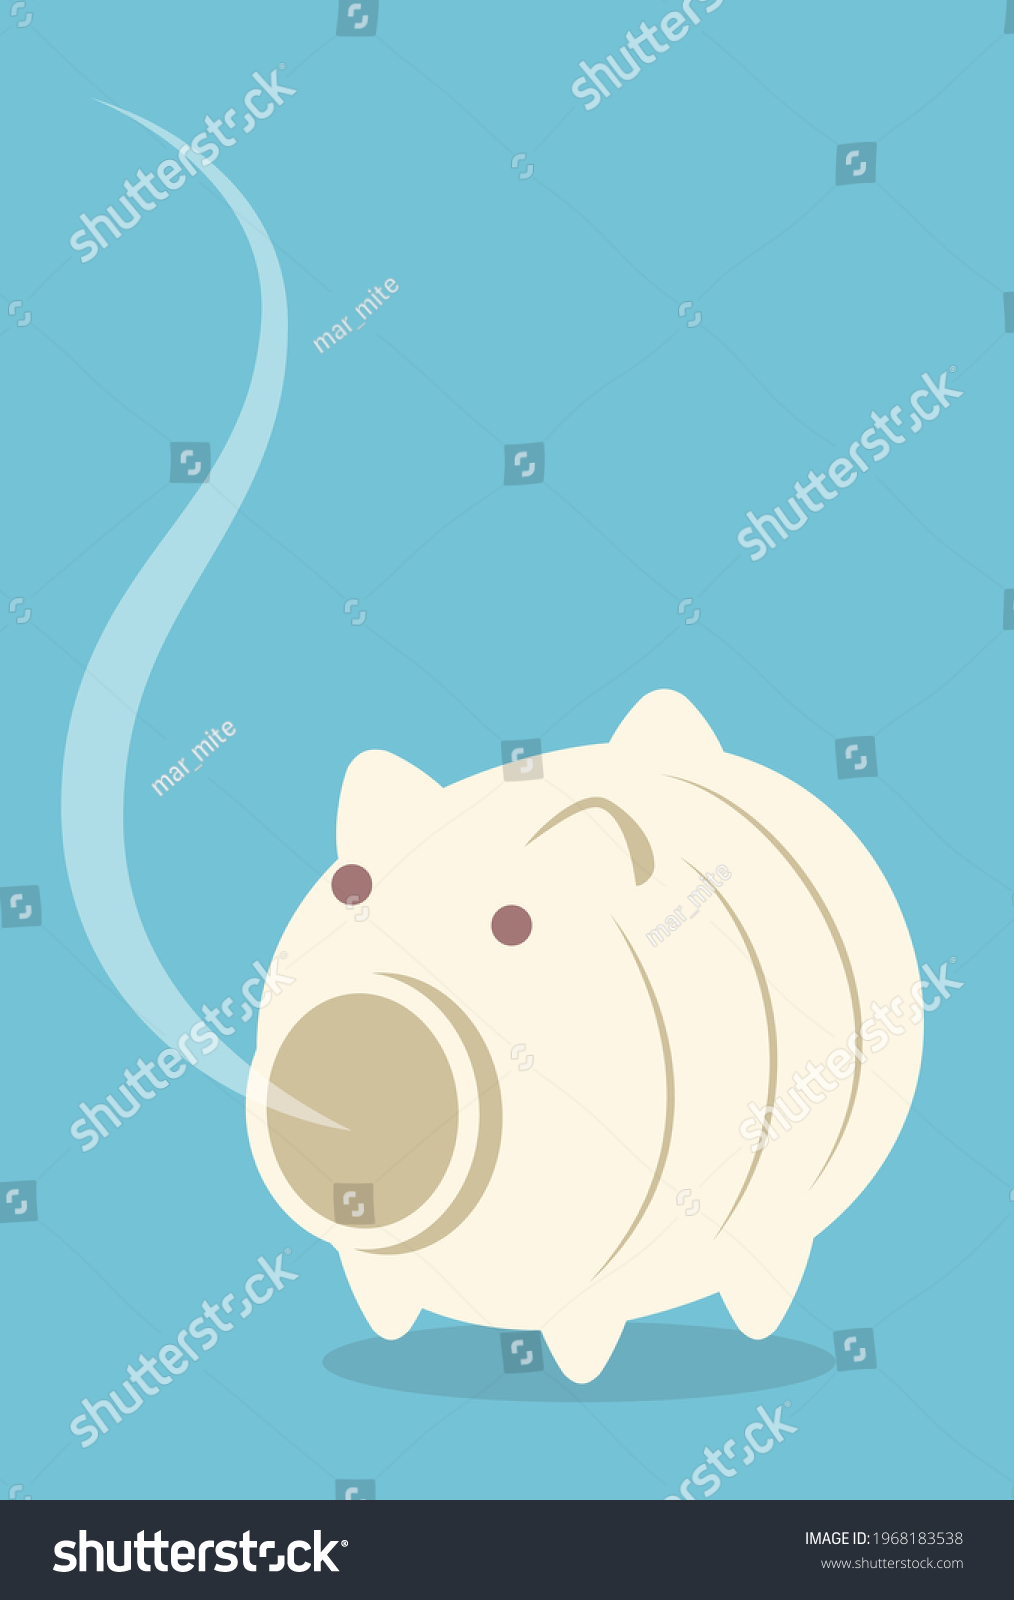 SVG of vector illustration of a piggy mosquito coil holder for banners, cards, flyers, social media wallpapers, etc. svg